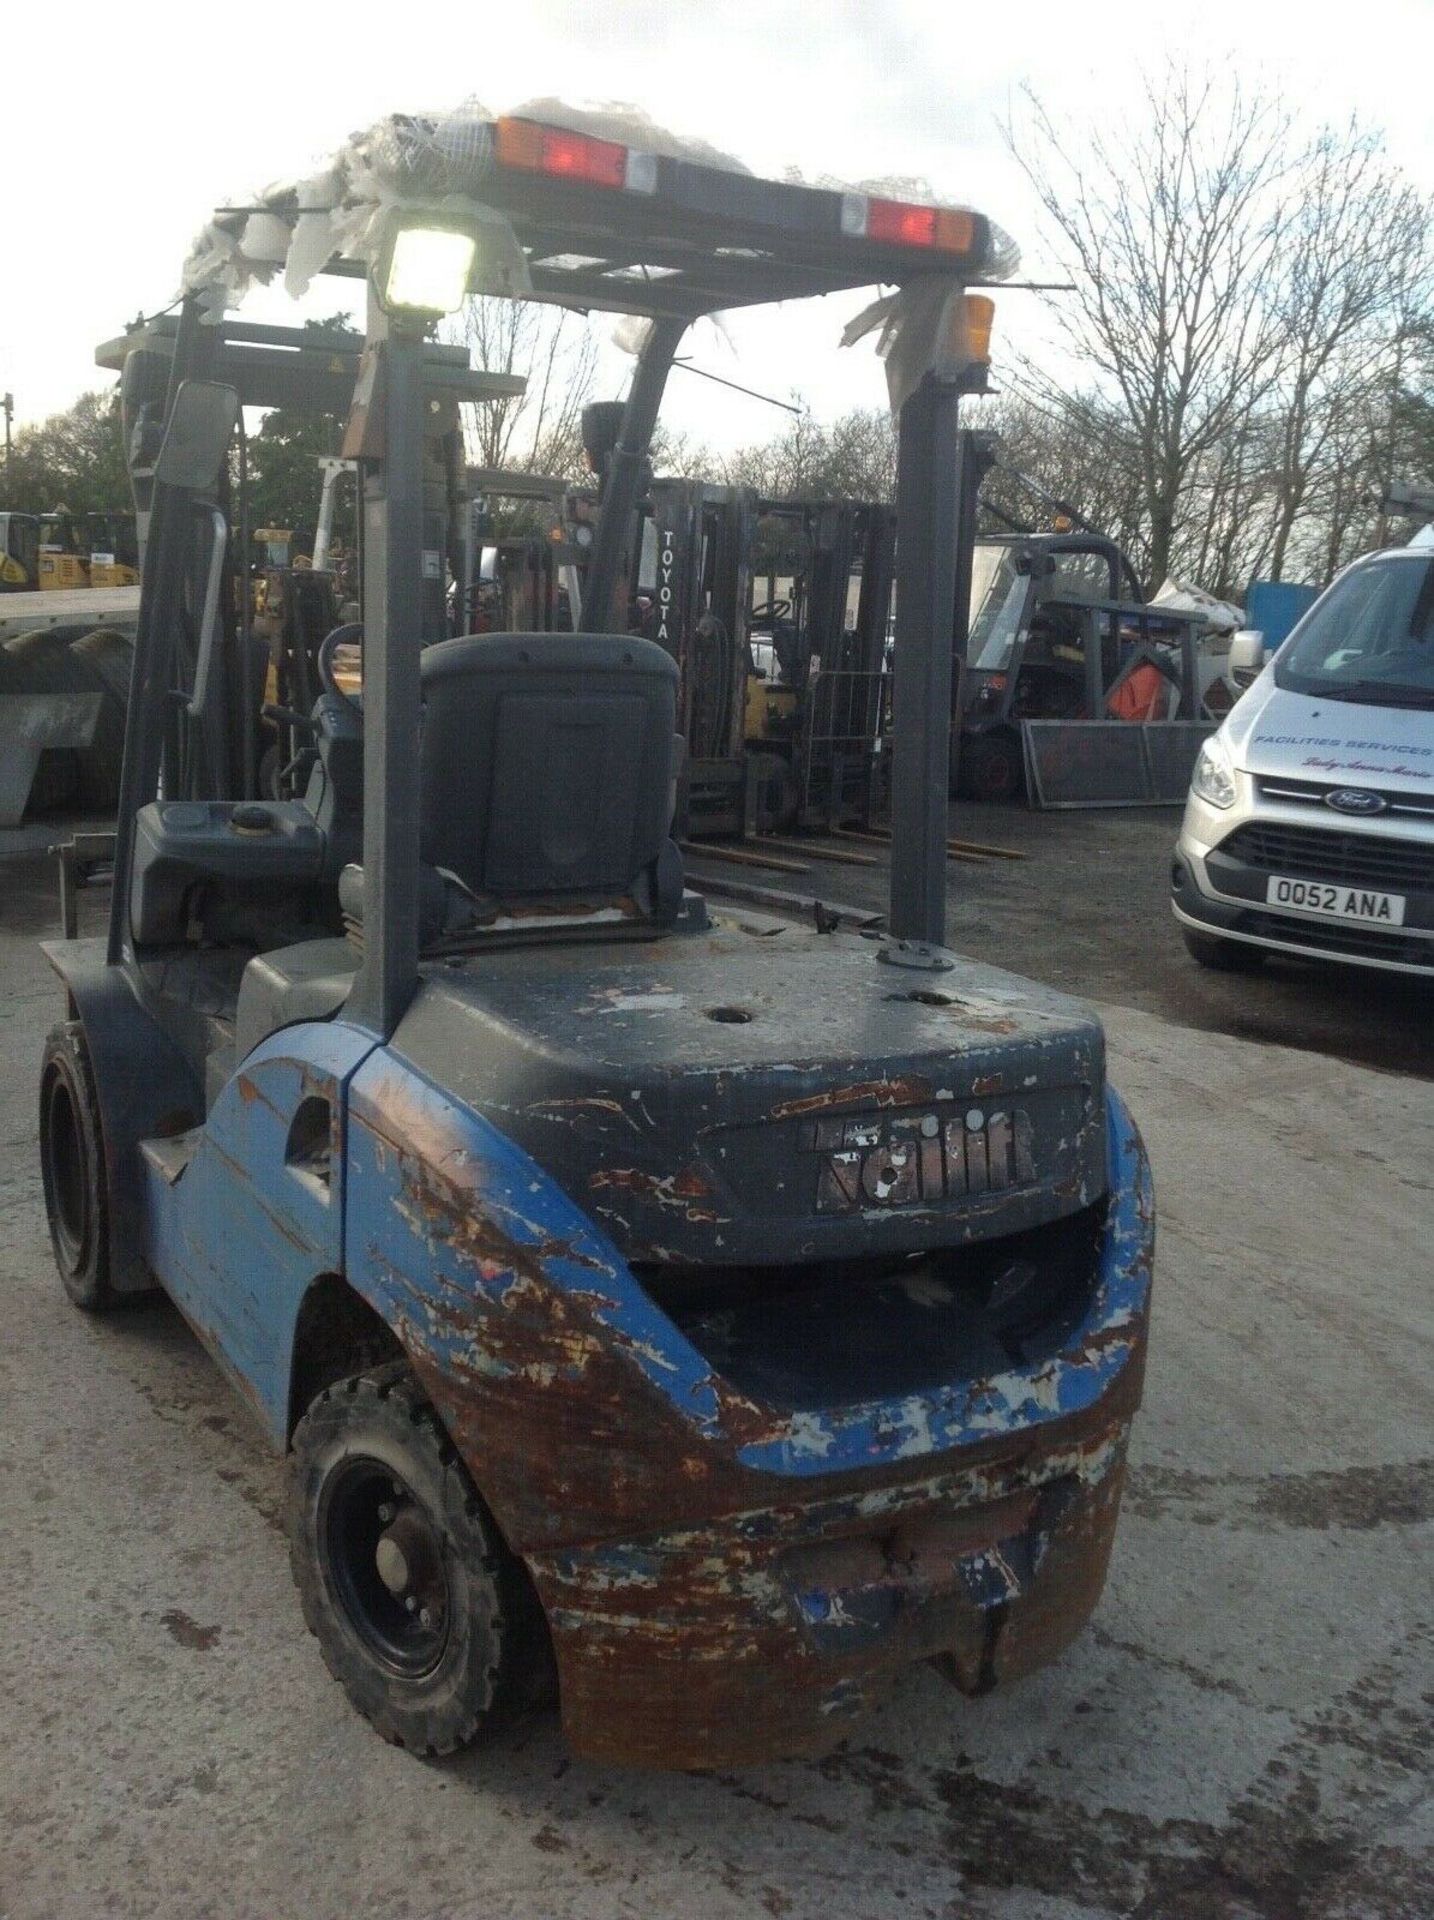 Taillift 3 ton diesel forklift - Image 2 of 6